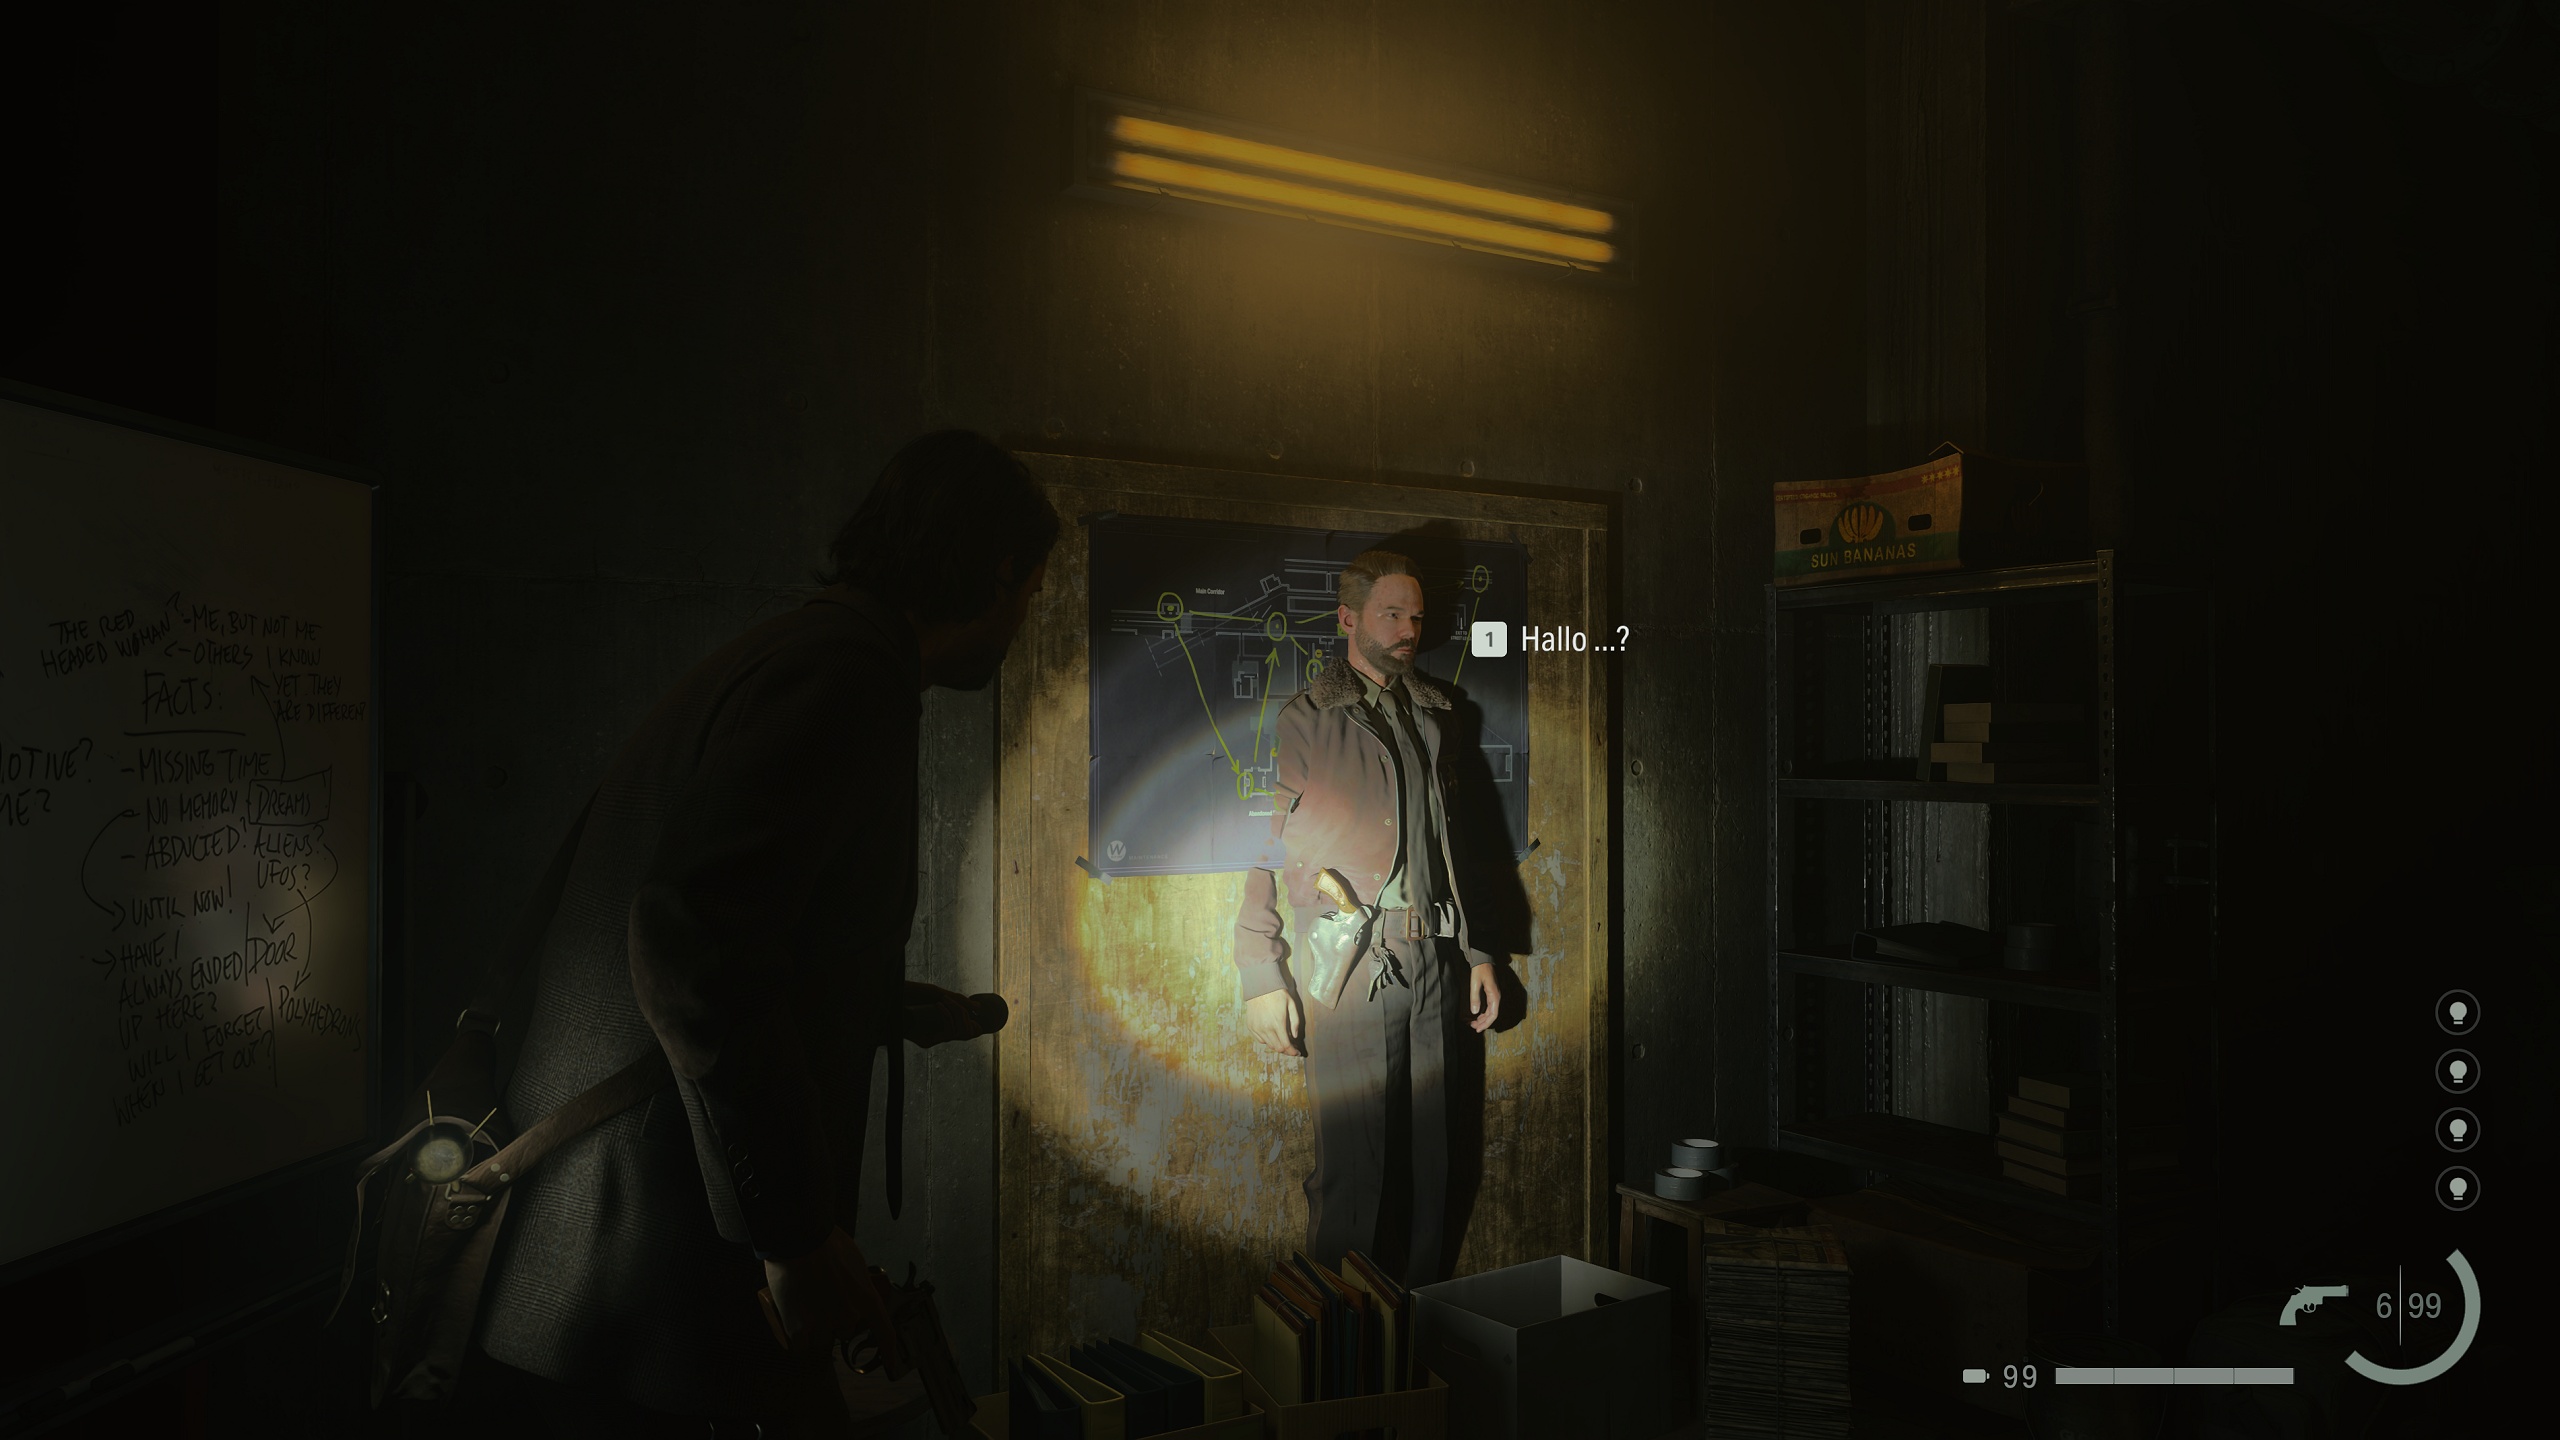 Alan Wake 2 system requirements need an RTX 2060 and DLSS for 30fps